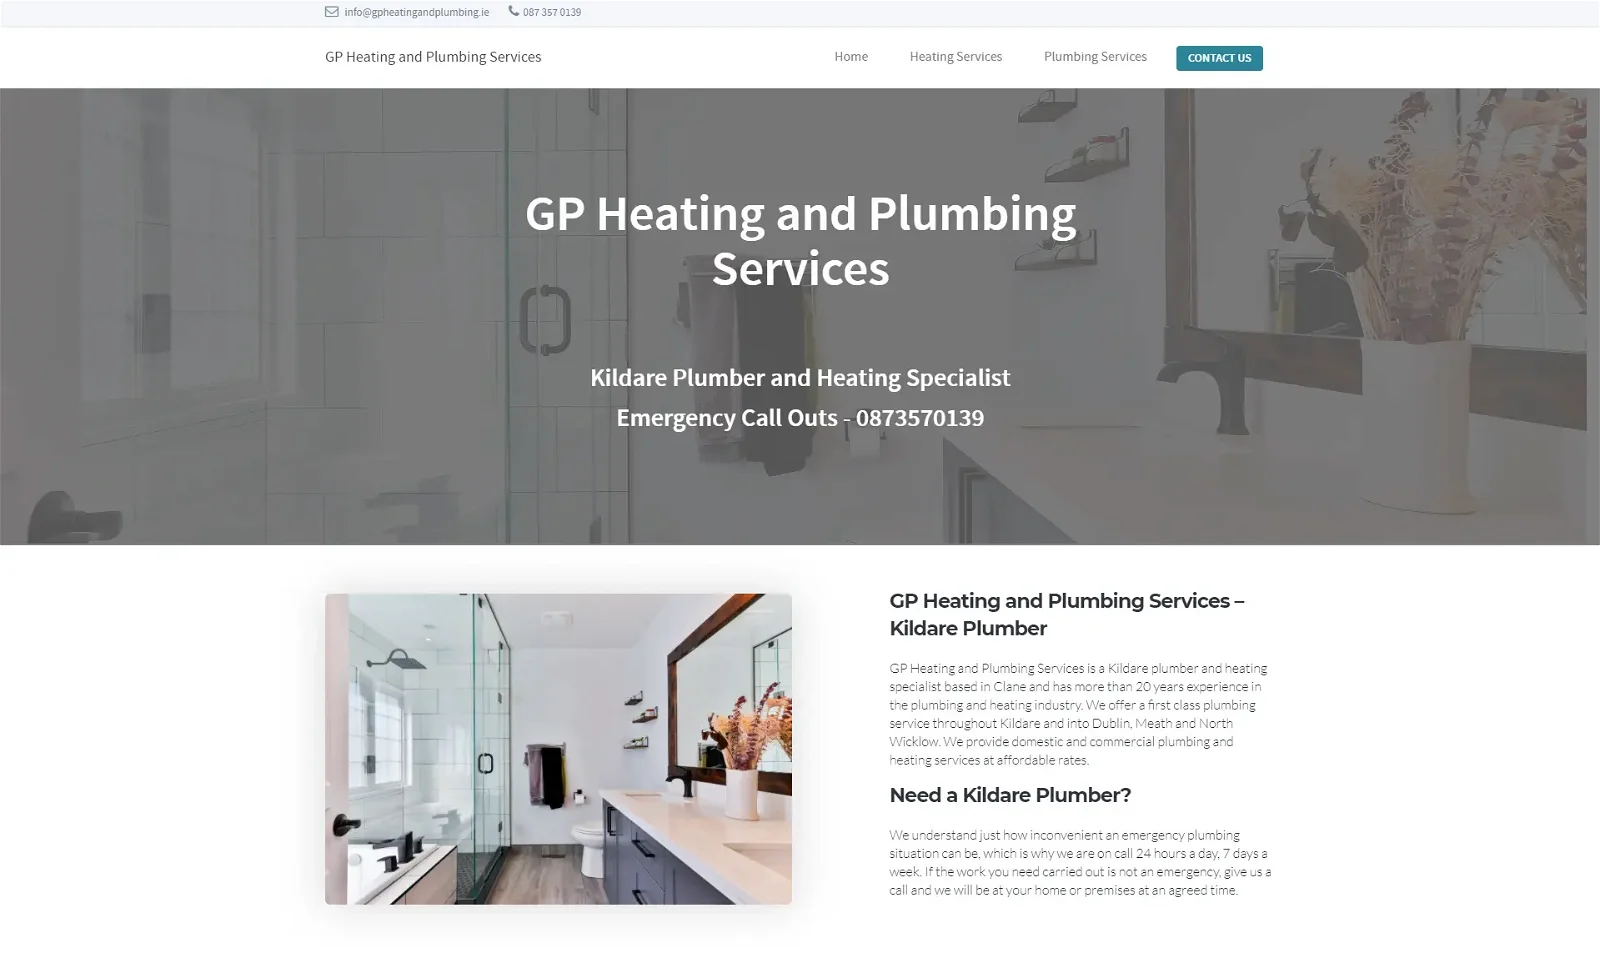 GP Heating and Plumbing Services is a Kildare-based plumbing and heating specialist offering services for both domestic and commercial customers.